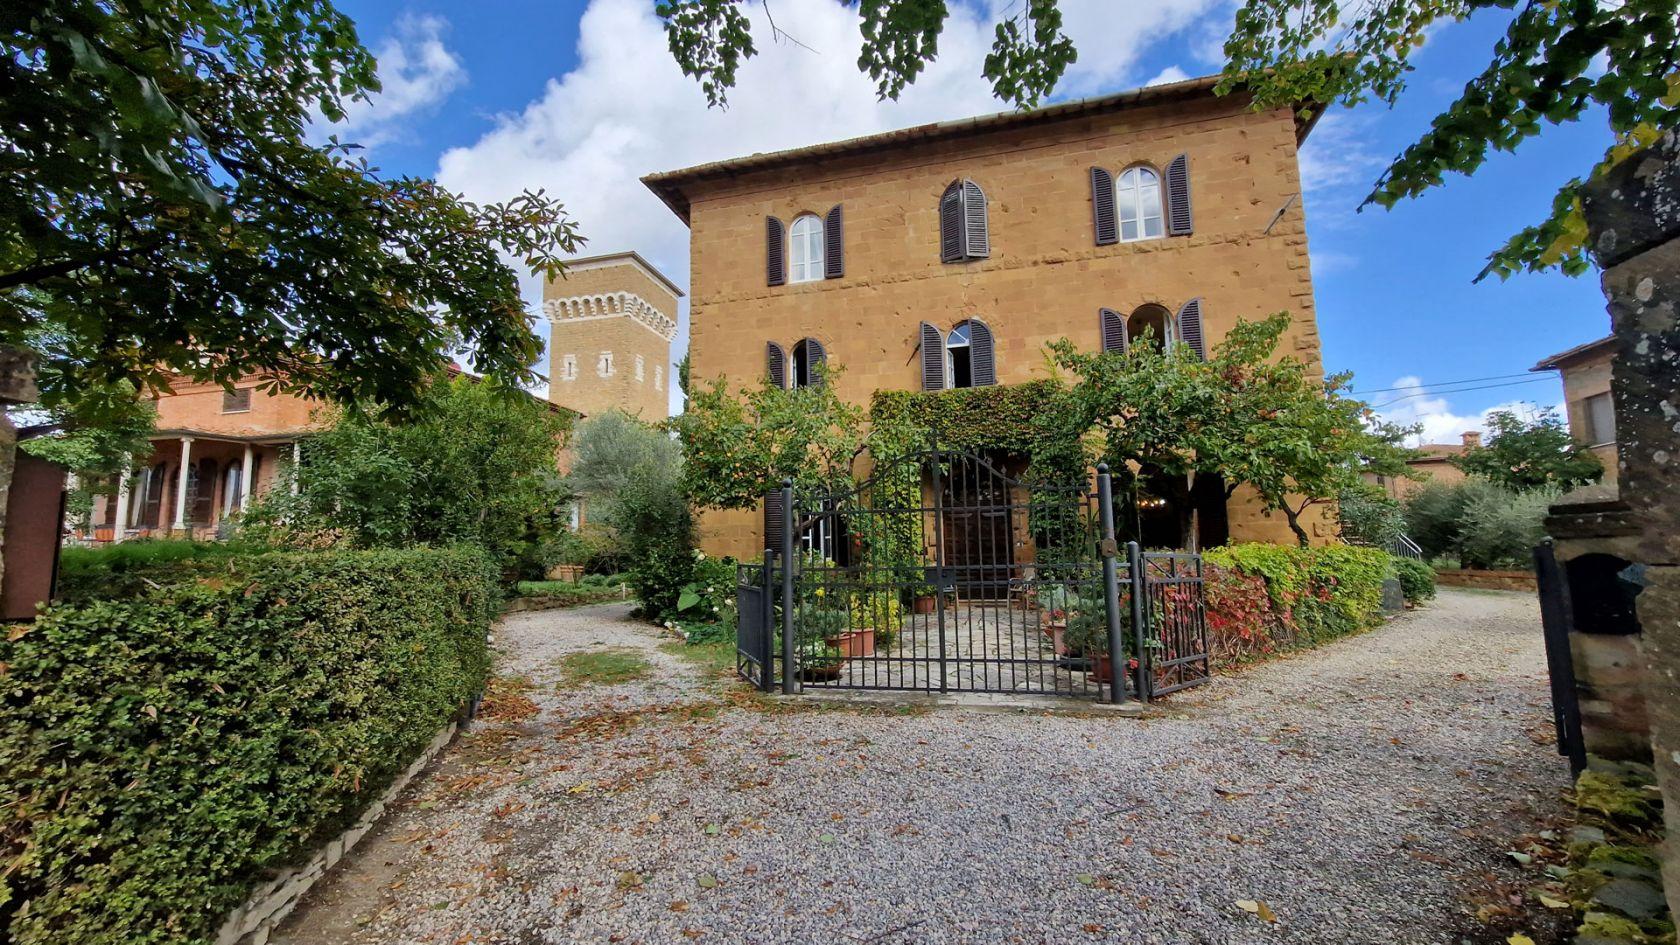 Toscana Immobiliare - Ancient villa with garden for sale a few steps from Pienza, Unesco heritage site and pearl of the Renaissance